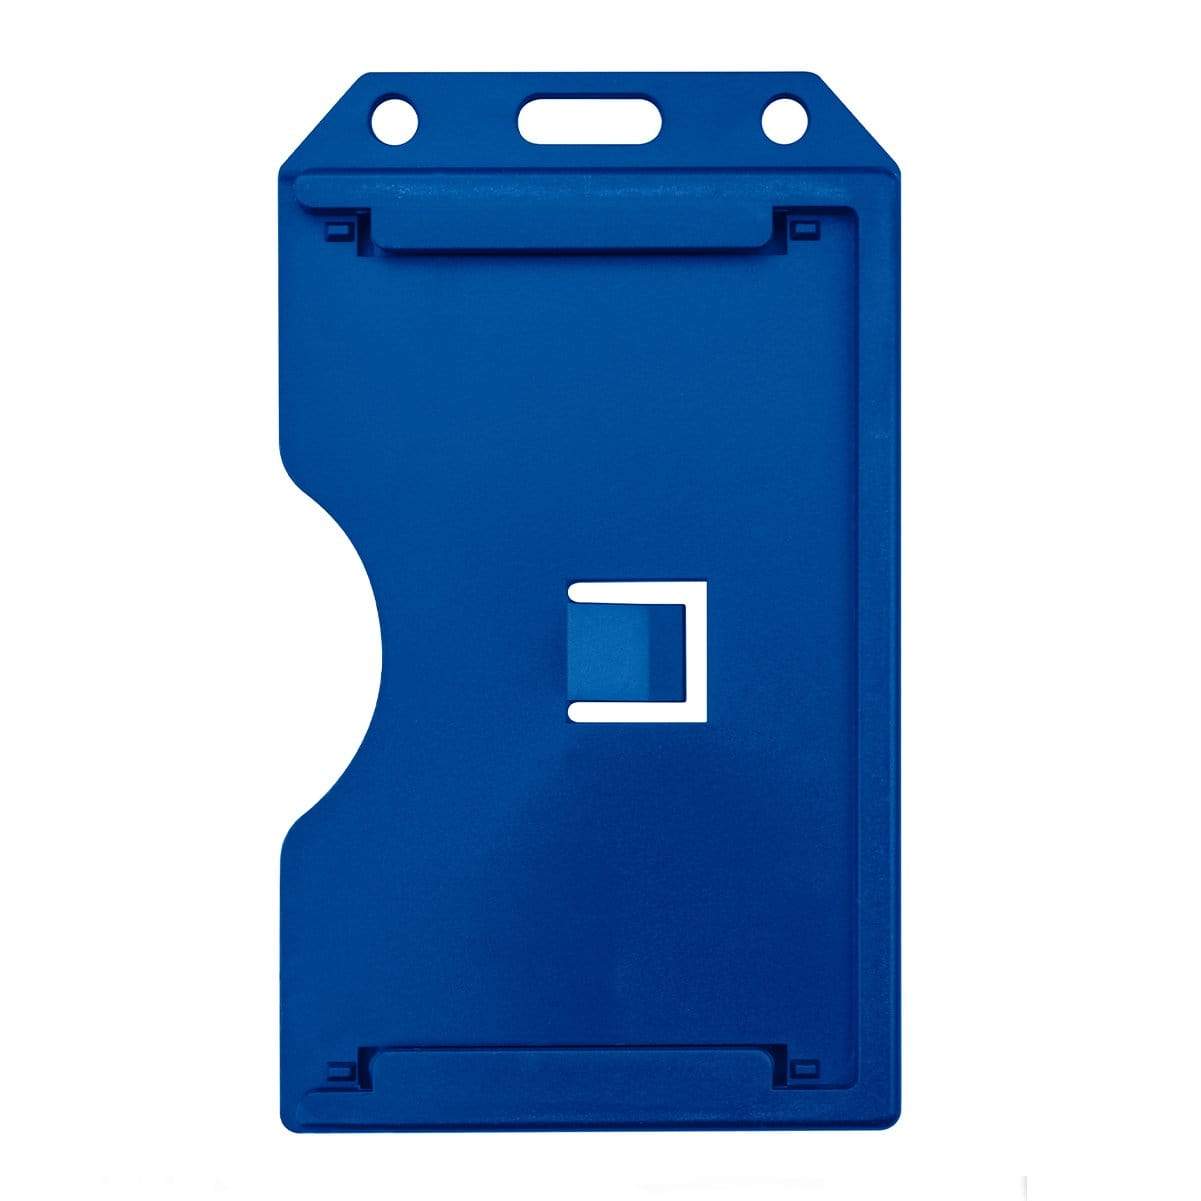 A 2 Sided Rigid Vertical MultiCard Badge Holder - Hard Plastic Multiple ID Card Holder (1840-308X), with a rectangular cutout near the center and a notch on the left side for easy access. The top features two holes for attaching a lanyard.